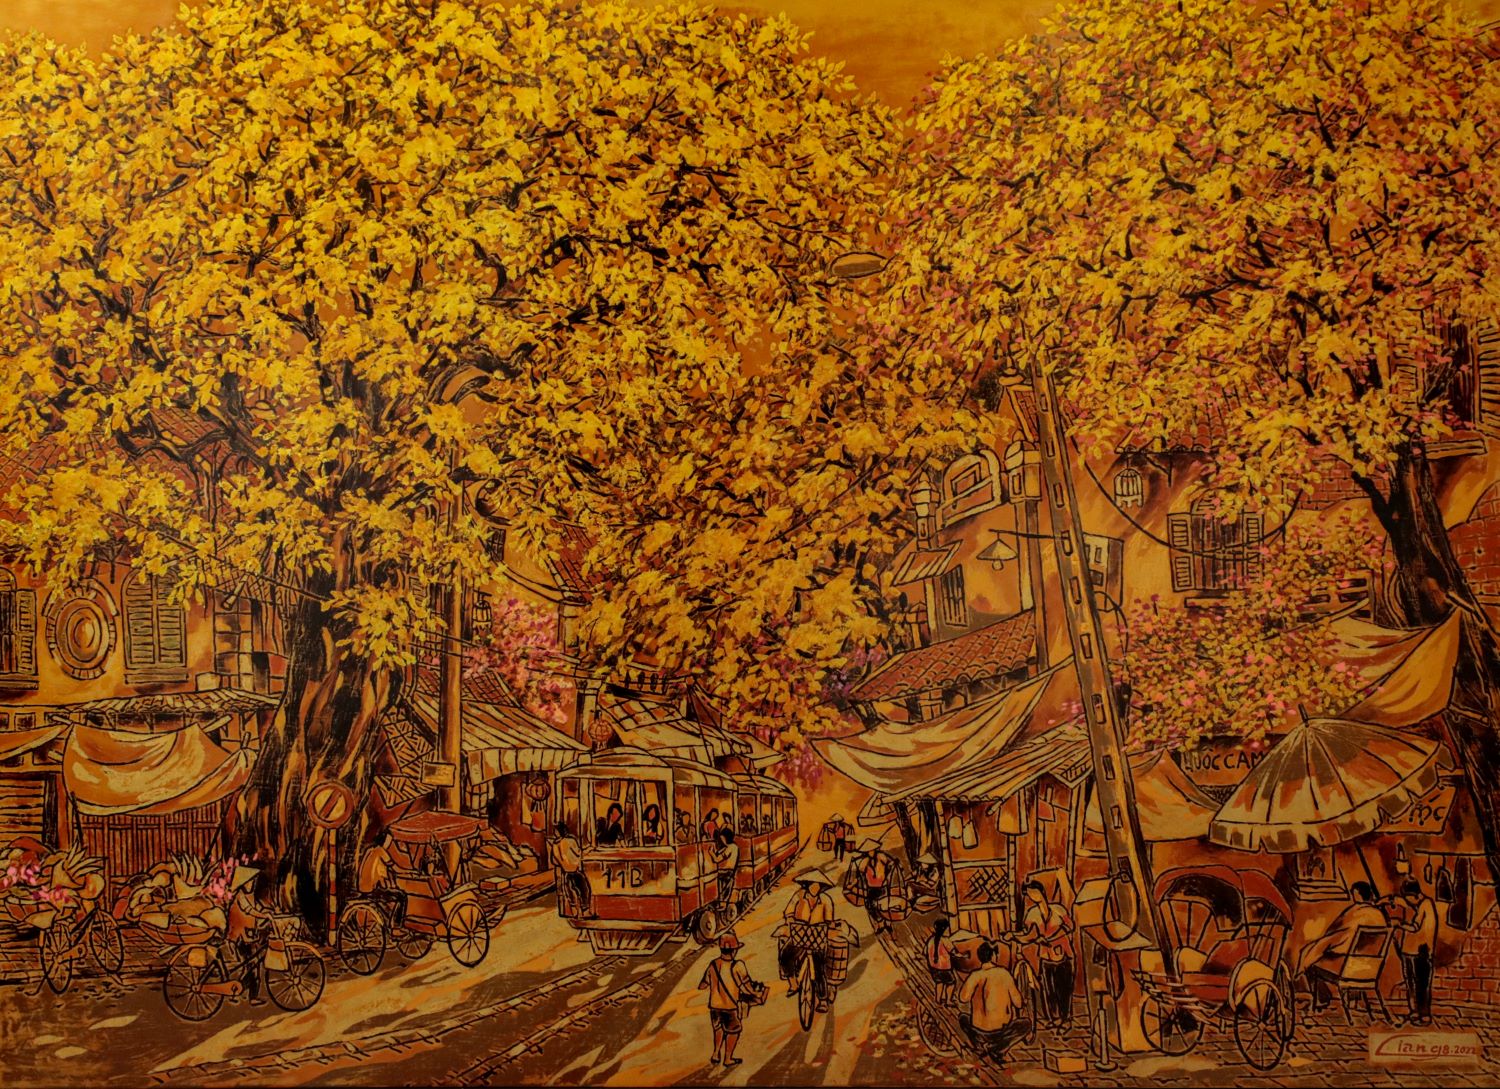 The Sound of Street - Vietnamese Lacquer Painting by Artist Nguyen Hong Giang